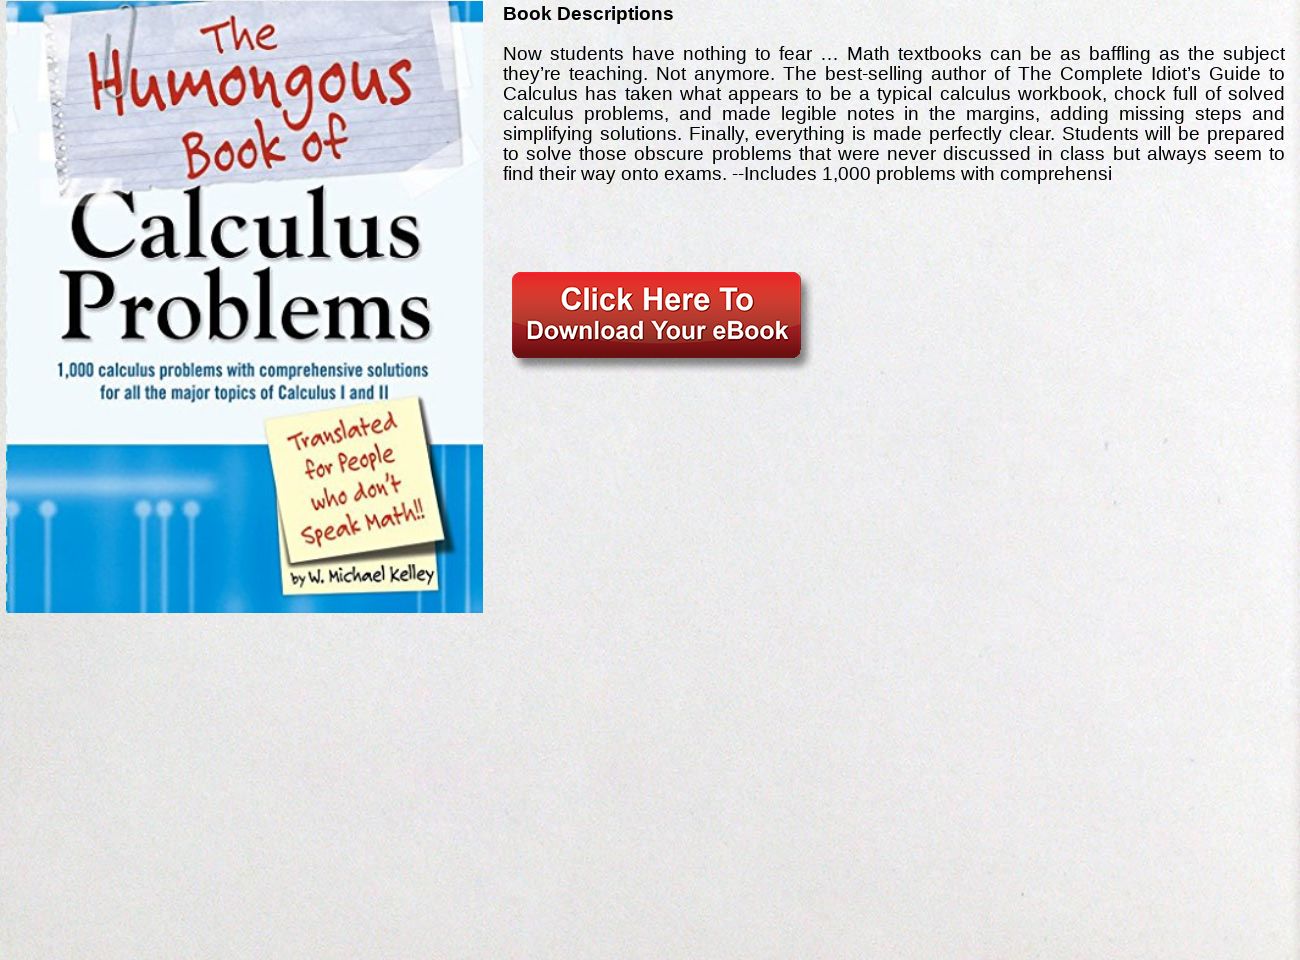 The humongous book of calculus problems pdf download